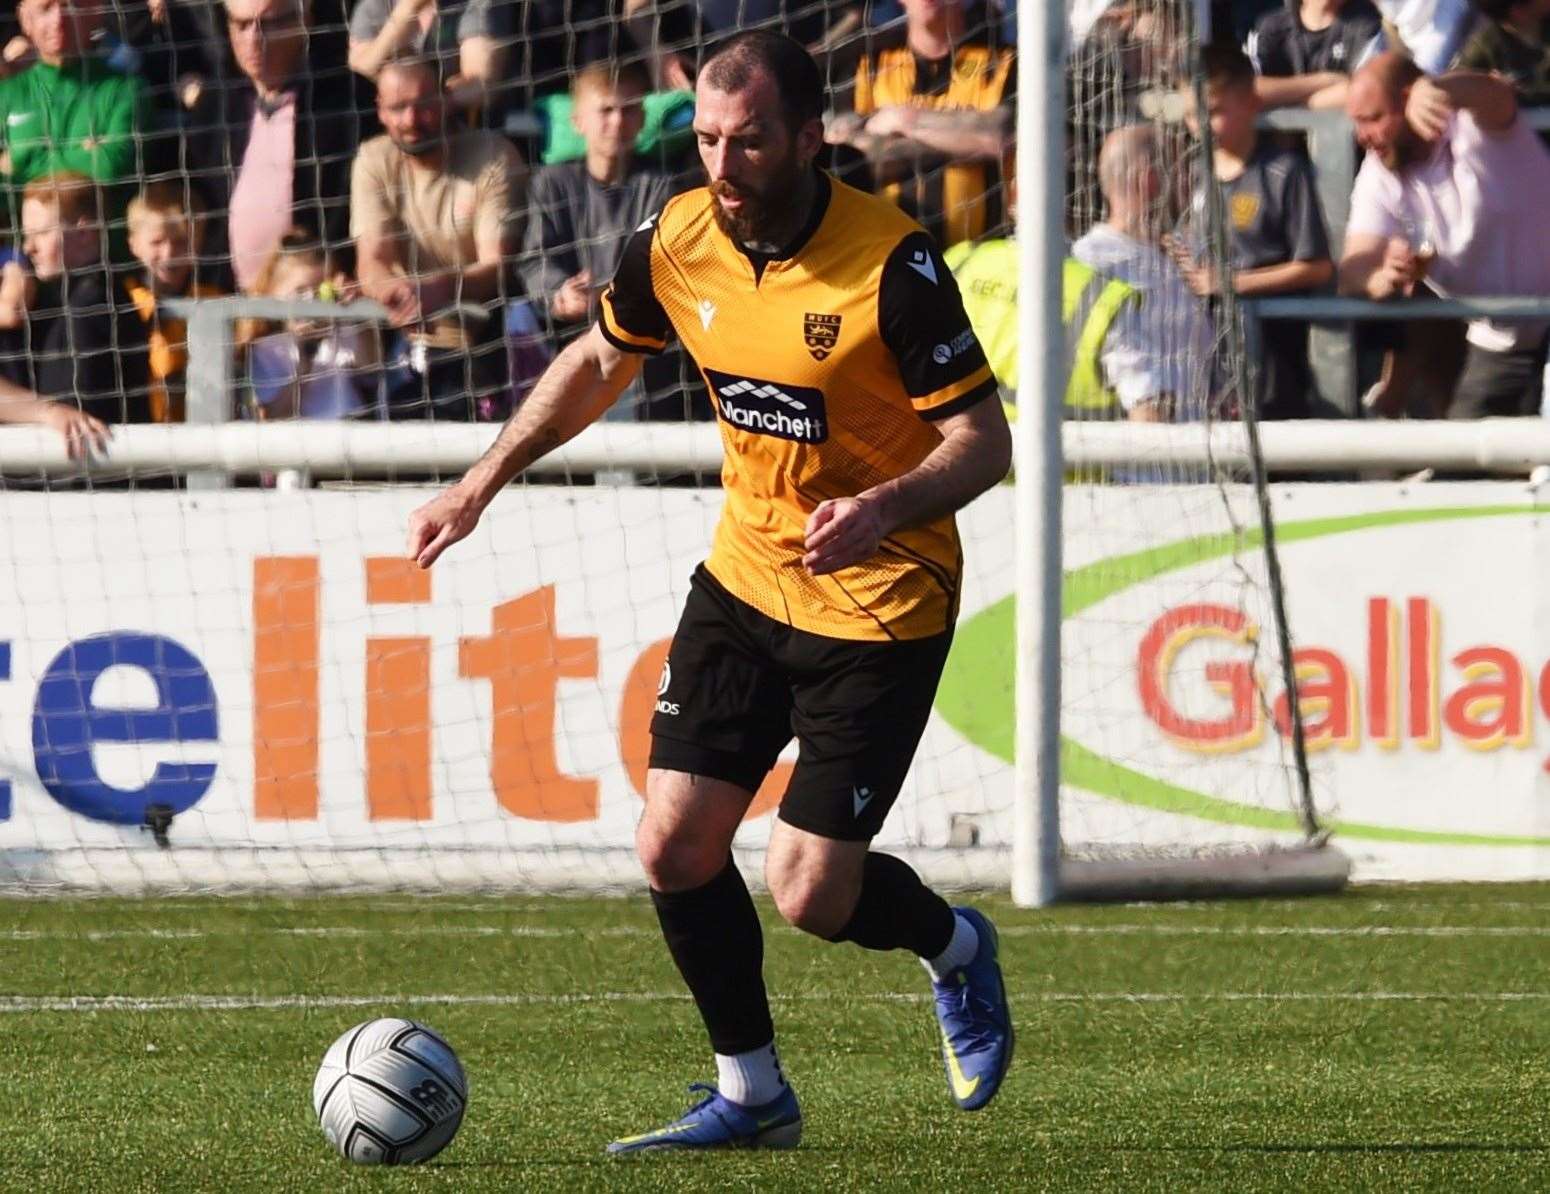 Joe Ellul has joined Sittingbourne after leaving Maidstone. Picture: Steve Terrell